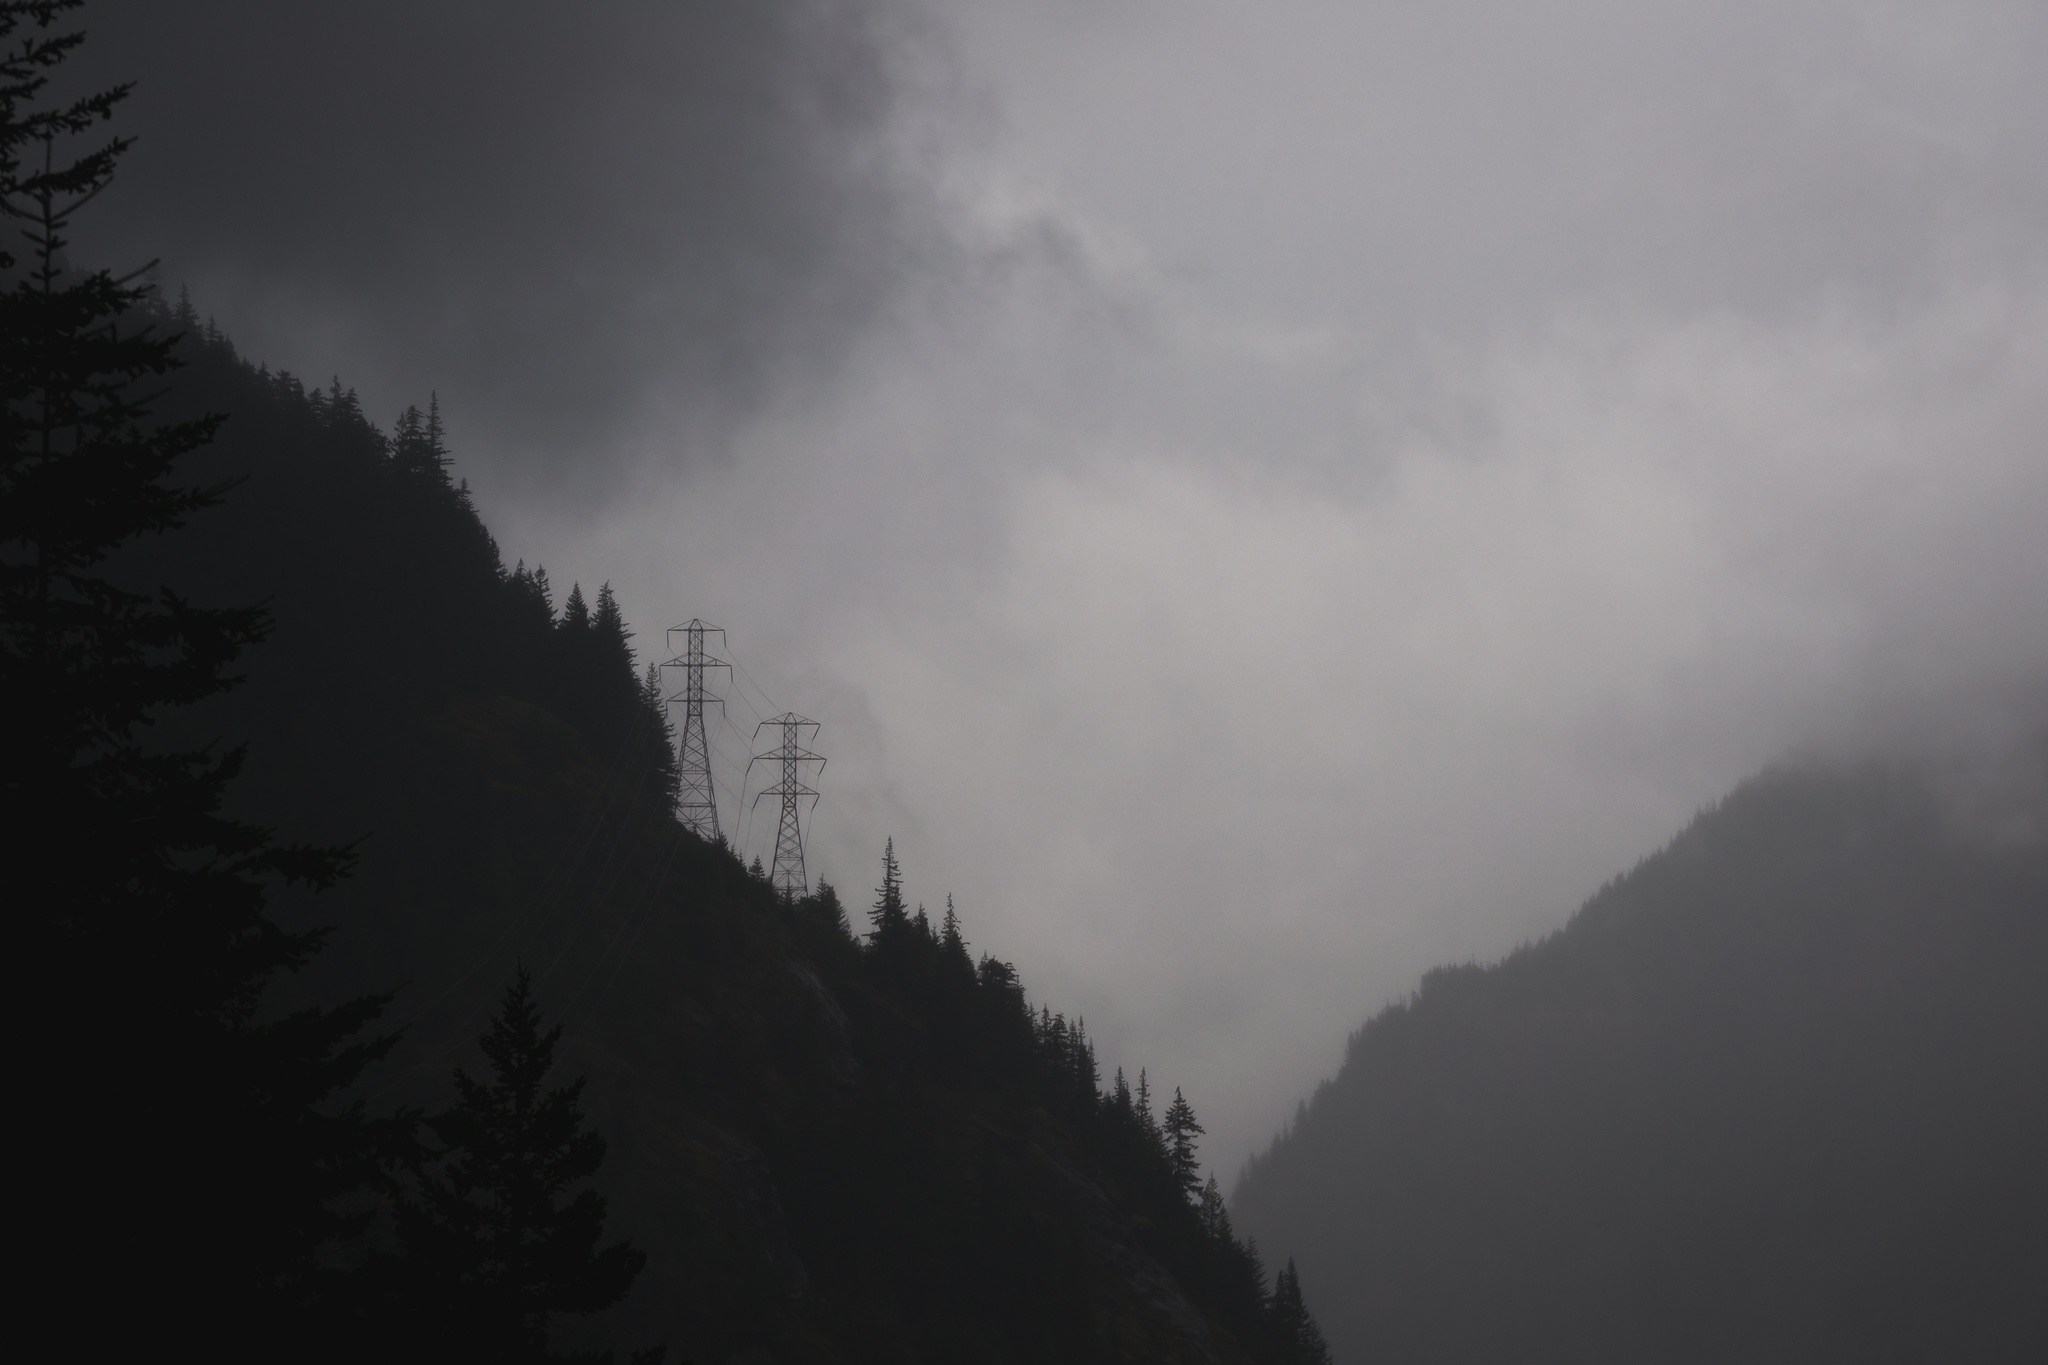 2048x1365 Wallpaper : tower, Misty, contrast, washington, moody, power, cloudy, foggy, powerlines, mysterious, pacificnorthwest, pnw, northcascades, subtle, northcascadesnationalpark, 55200mmf456, d3100 957026 HD Wallpapers